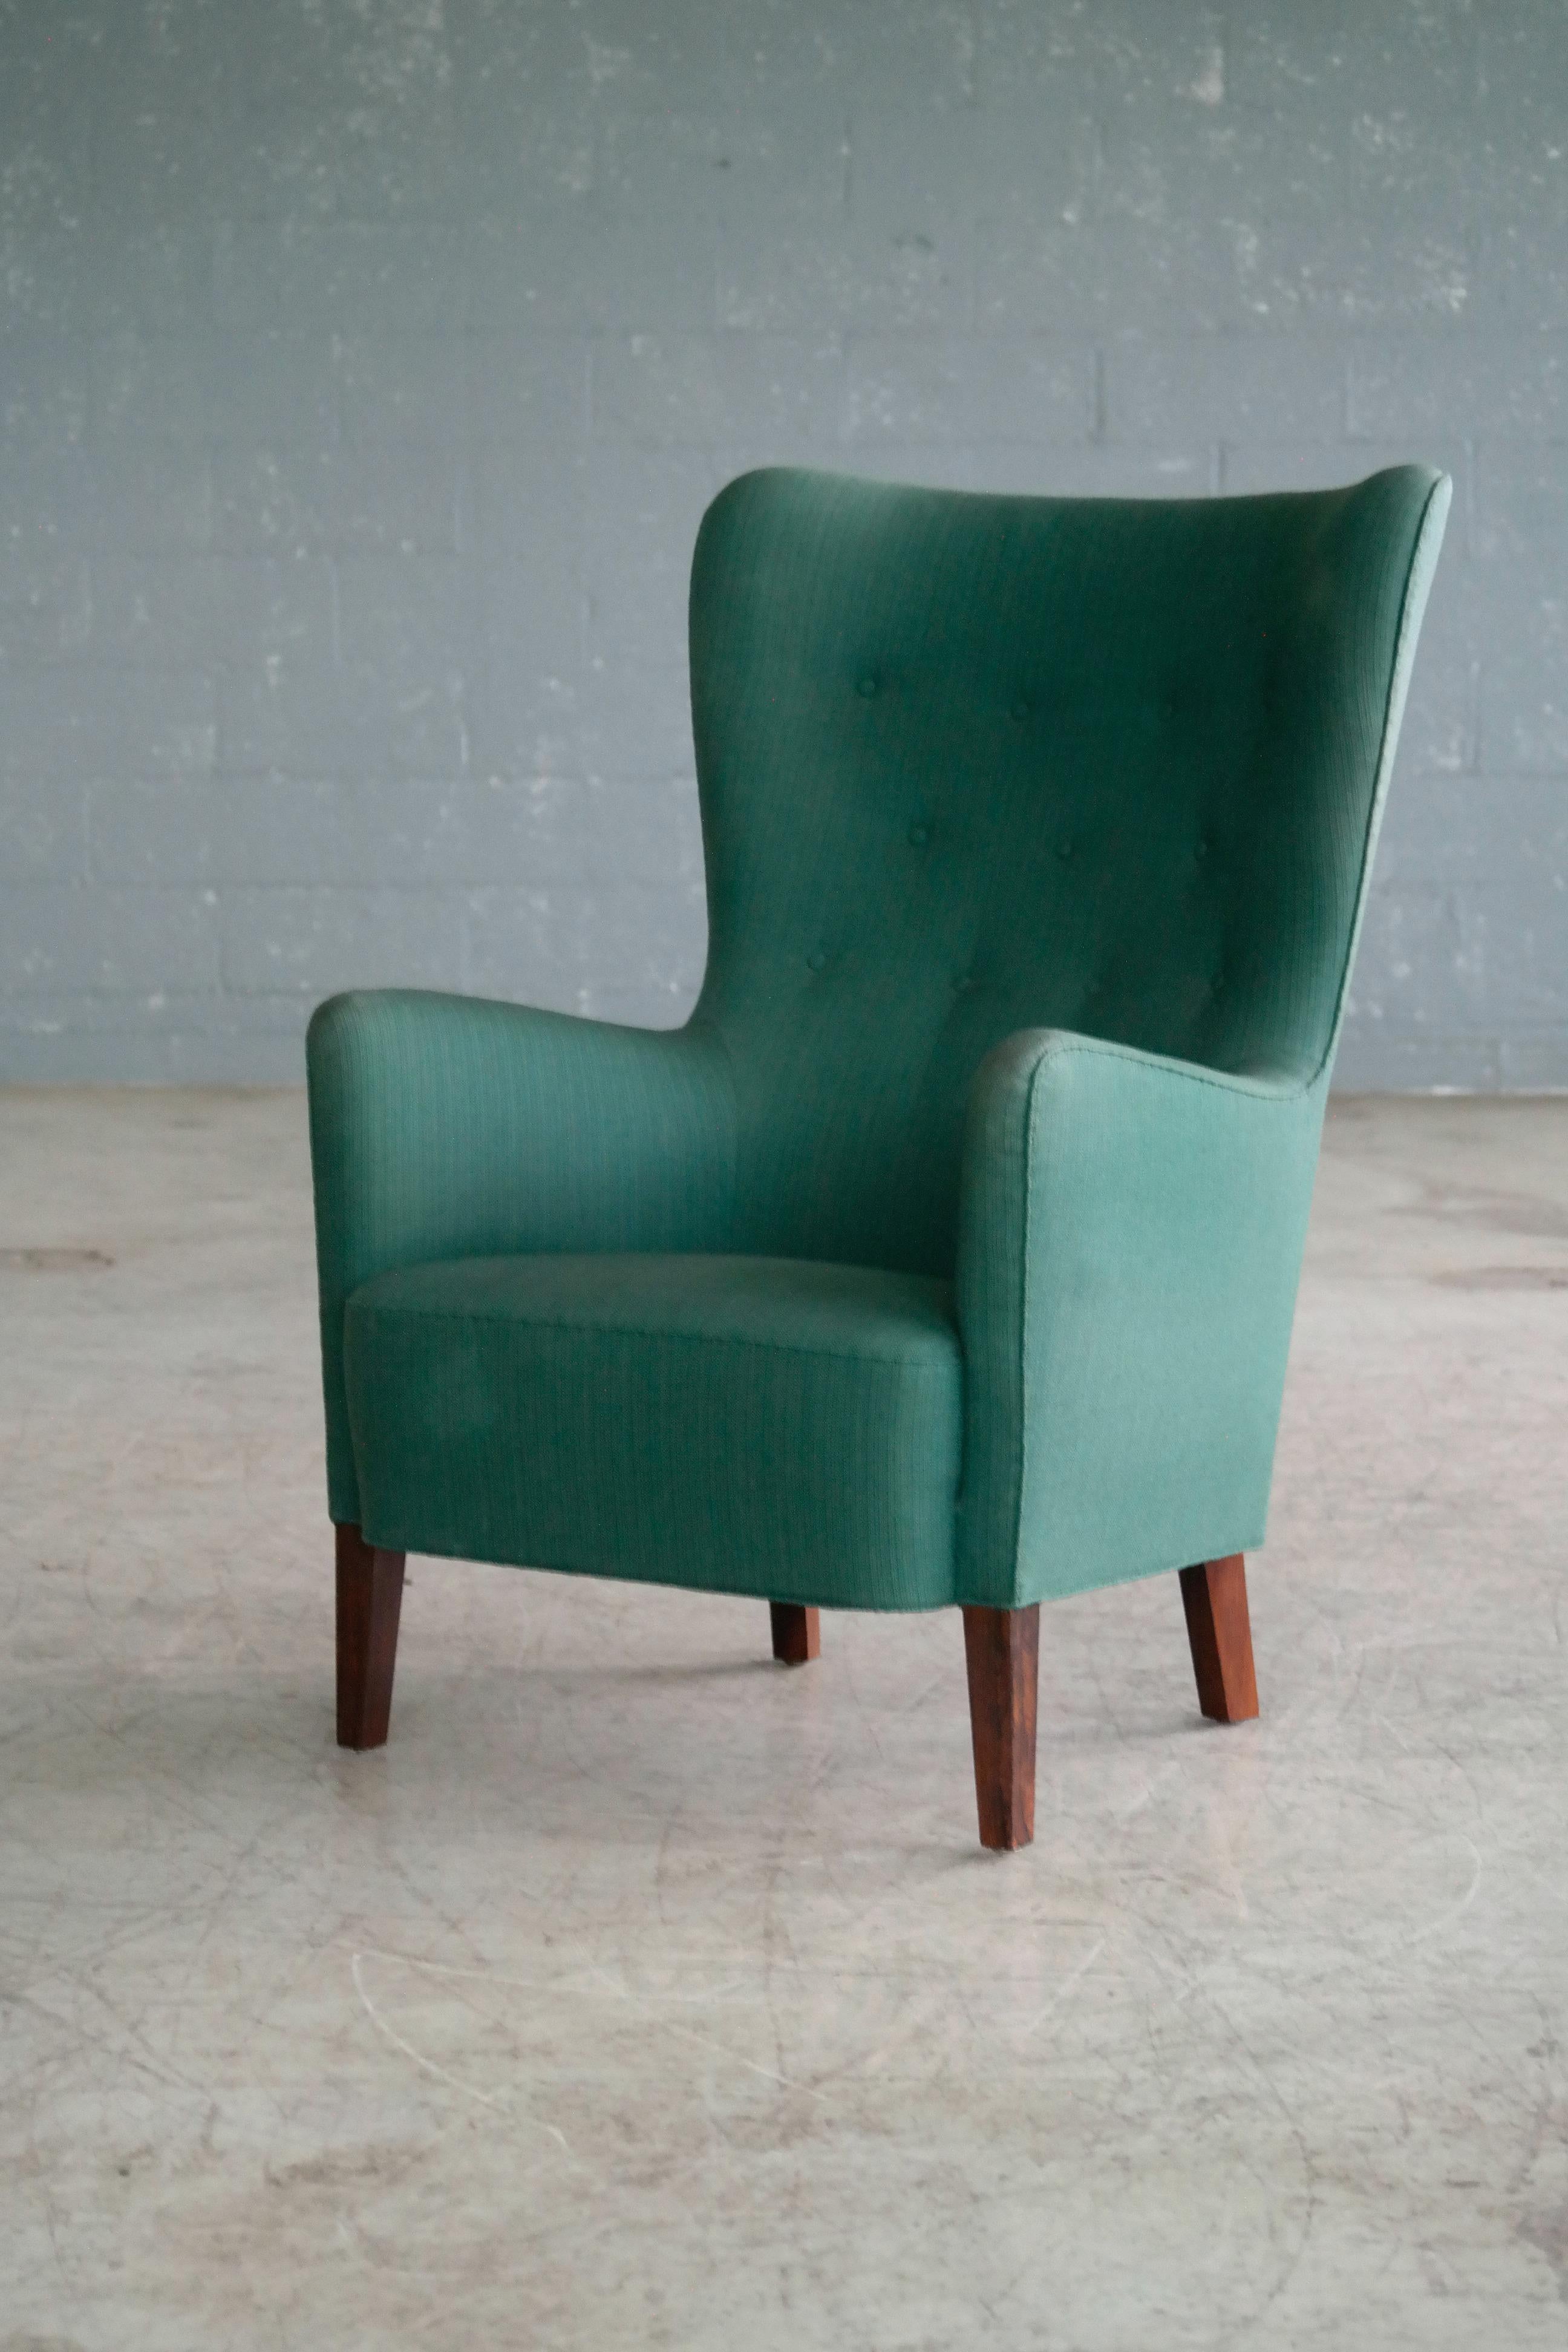 A supremely comfortable and organic easy chair that adds charm to any room. Slim silhouette and elegant lines and proportions reminiscent of Frits Henningsen's classic timeless designs. A chair that is inviting and evokes tranquillity, fulfilling